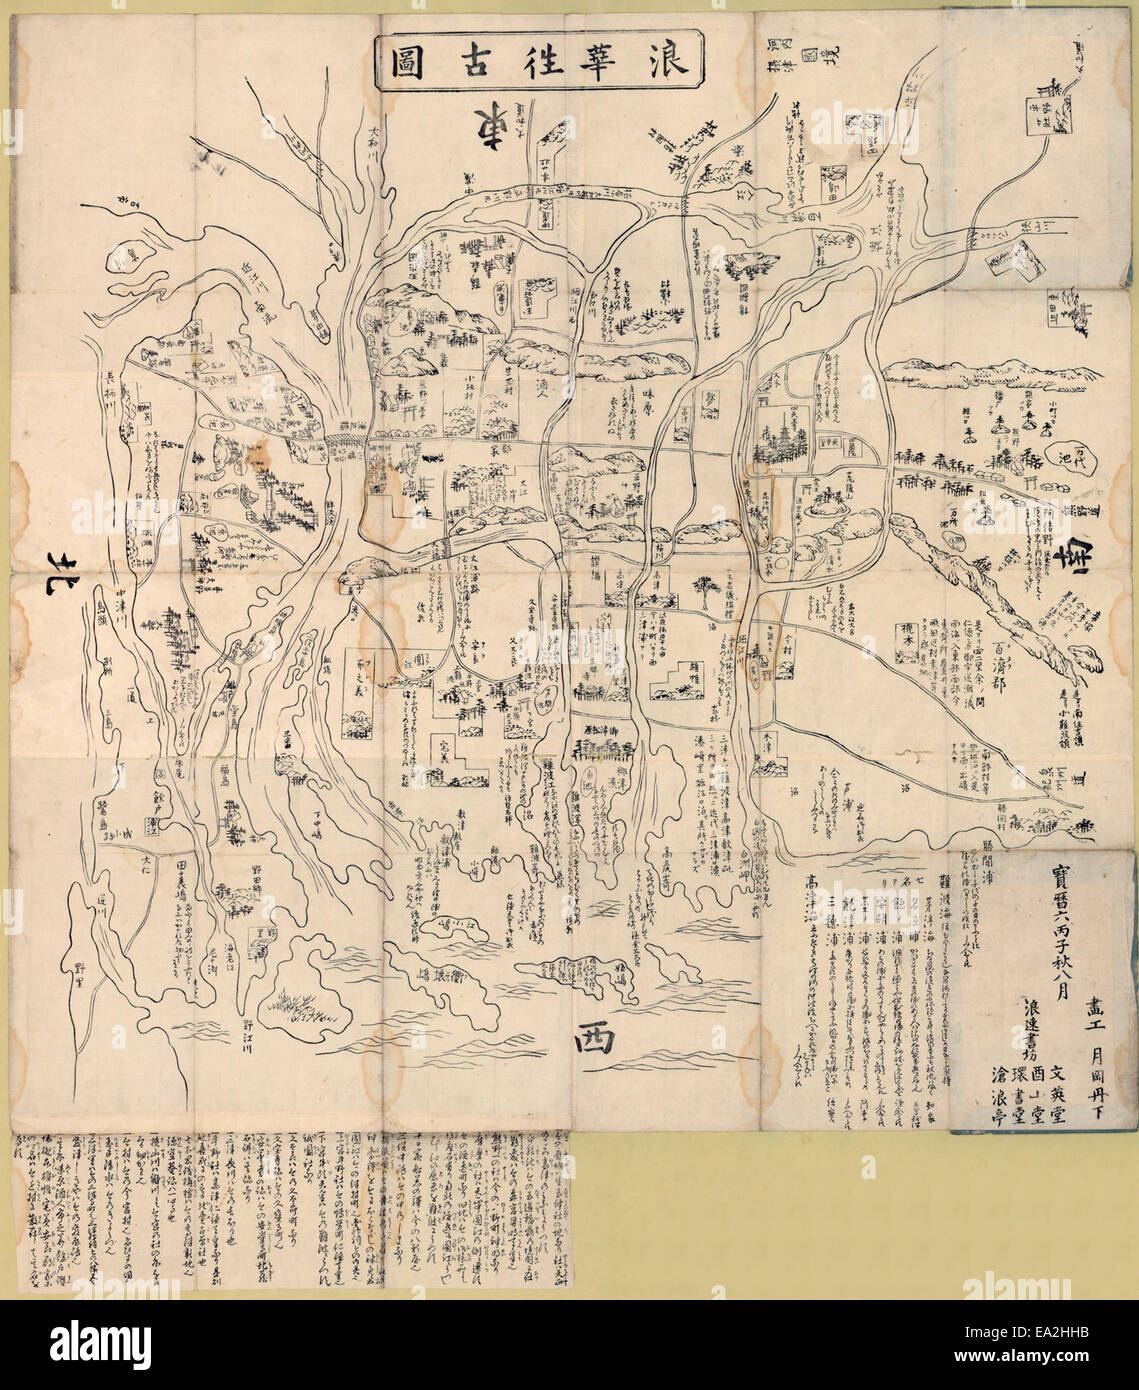 Old Map Of Osaka High Resolution Stock Photography And Images Alamy